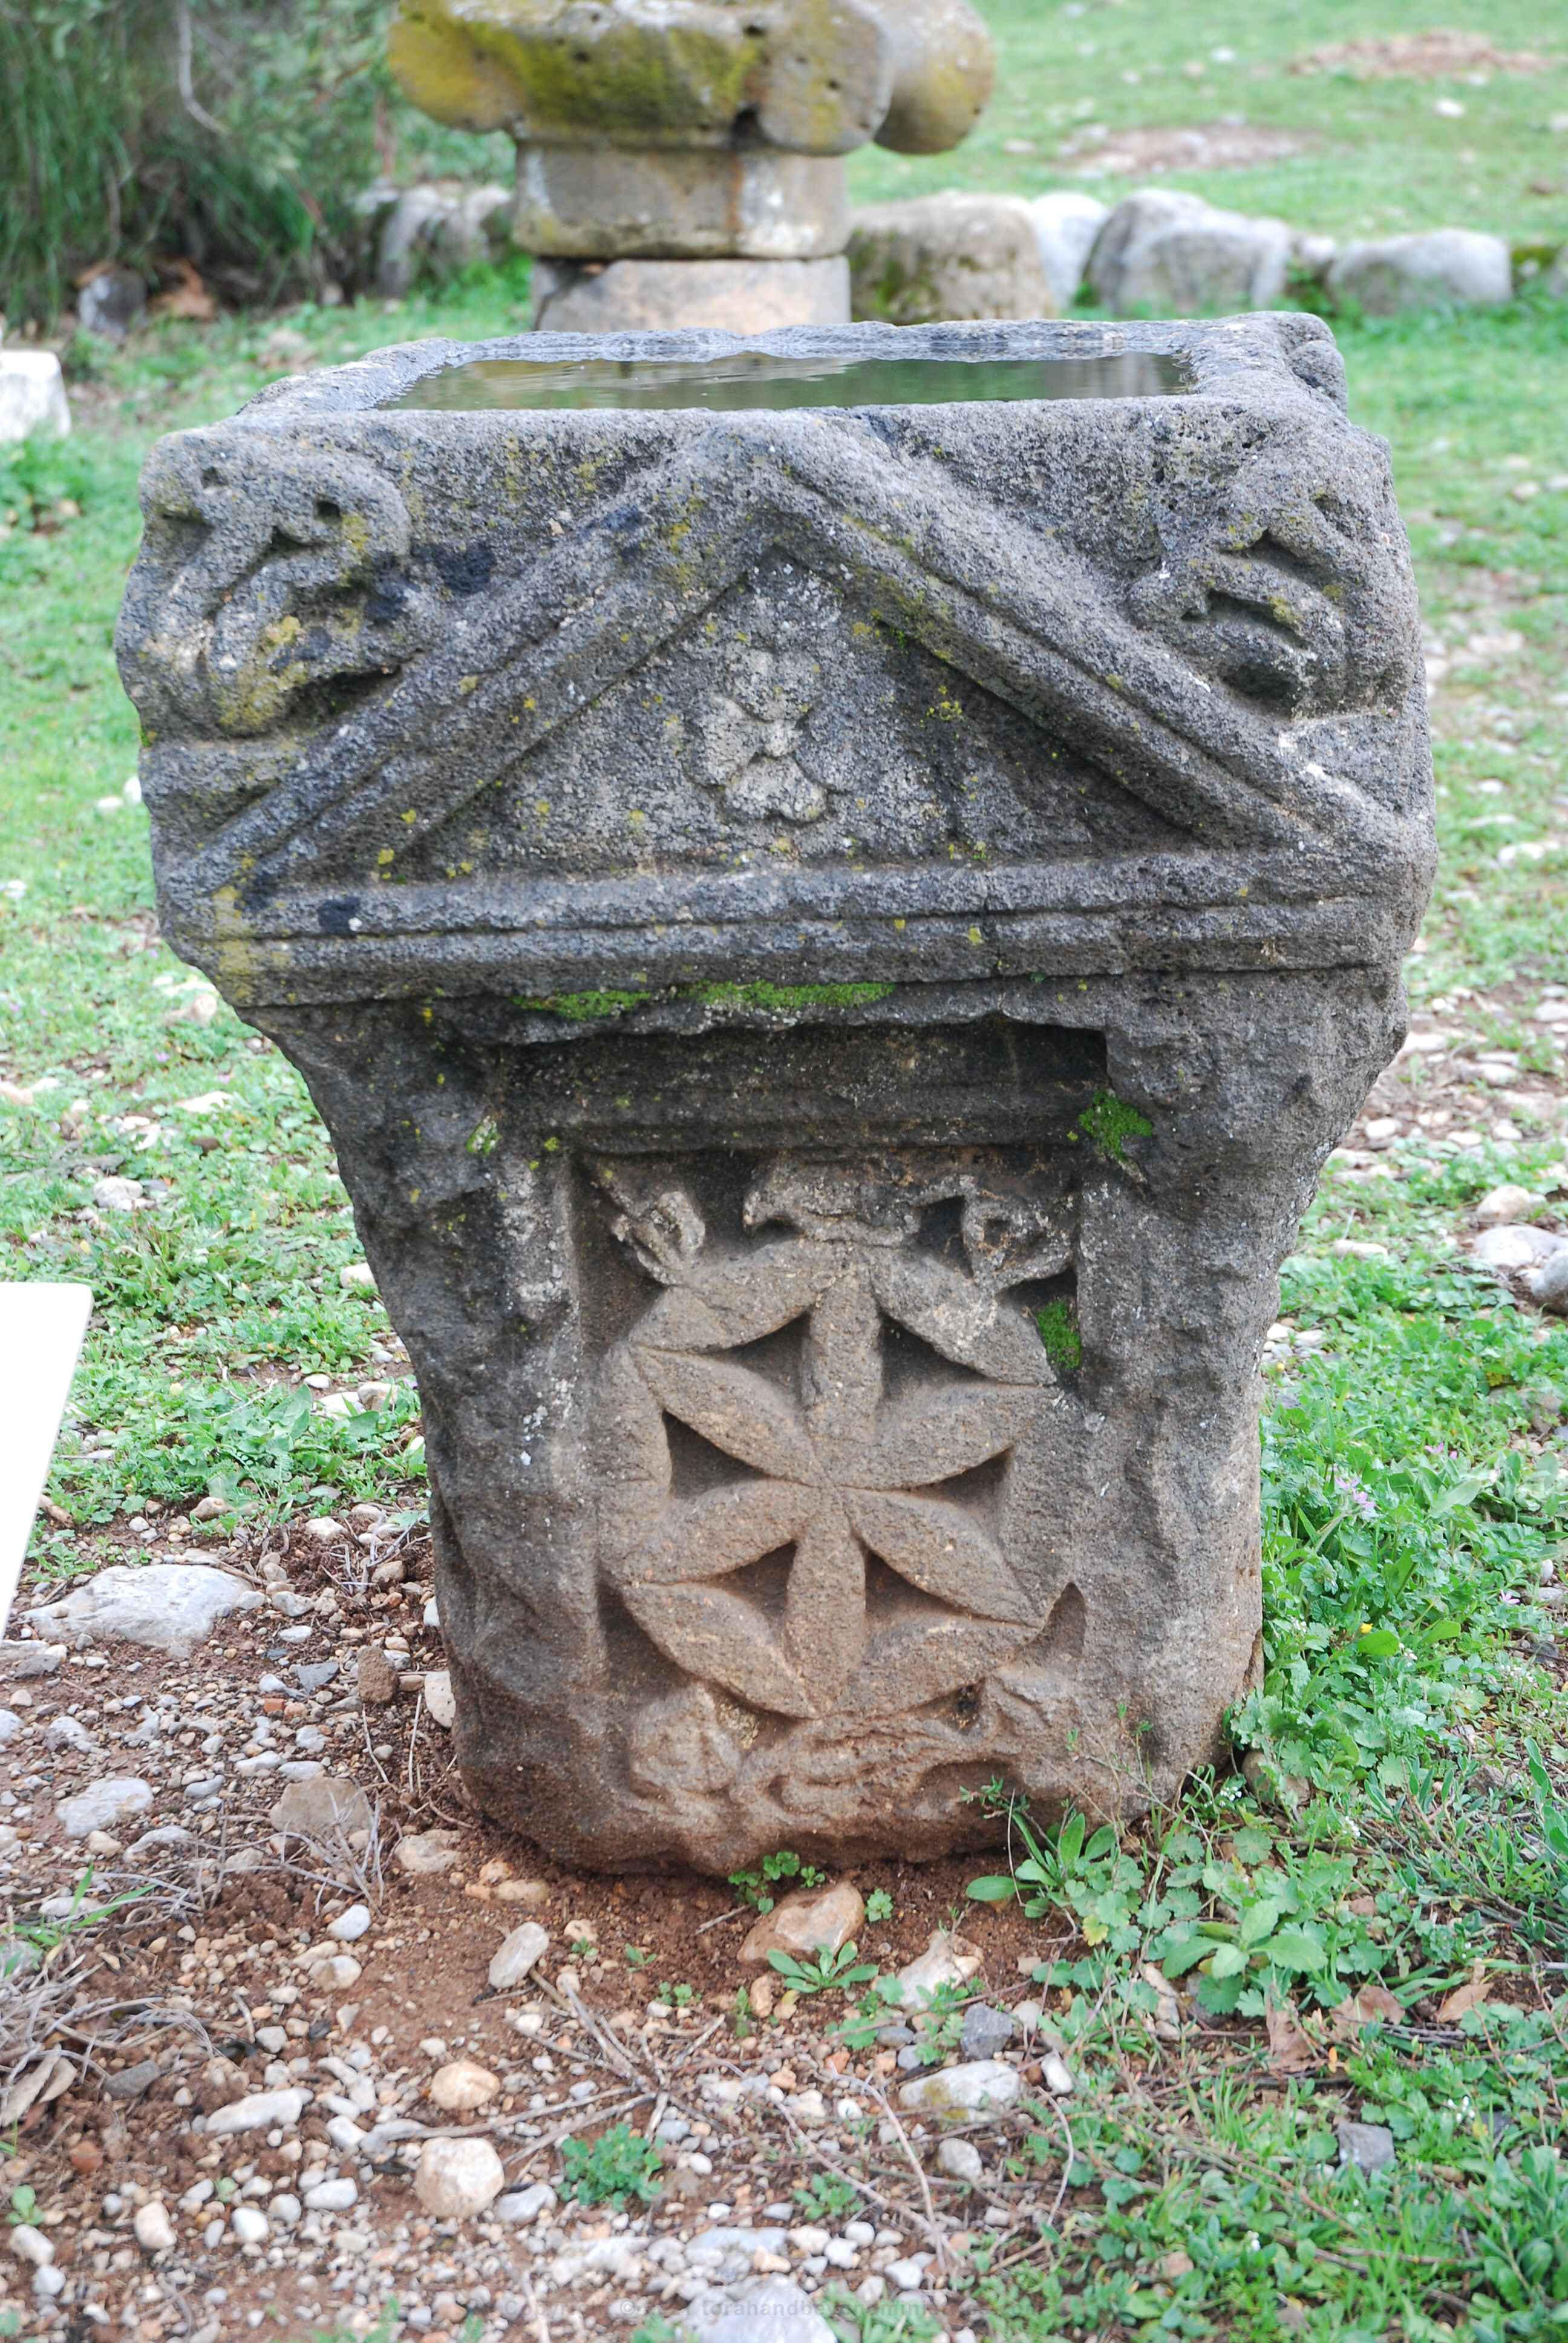 Stone altar in Israel showing the crocus flower